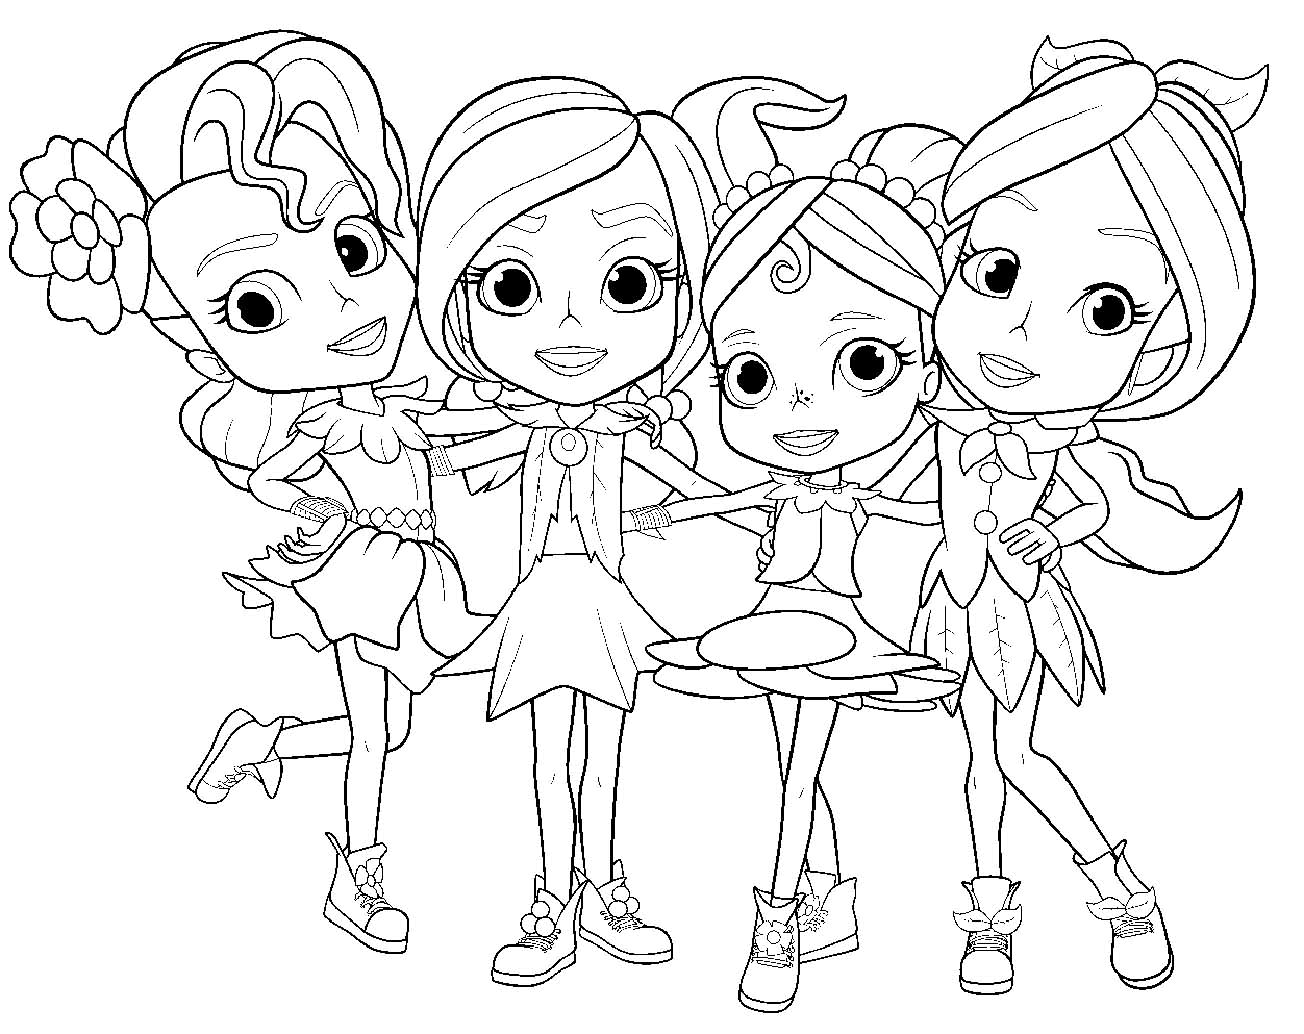 Rainbow Rangers coloring pages 18 – Having fun with children